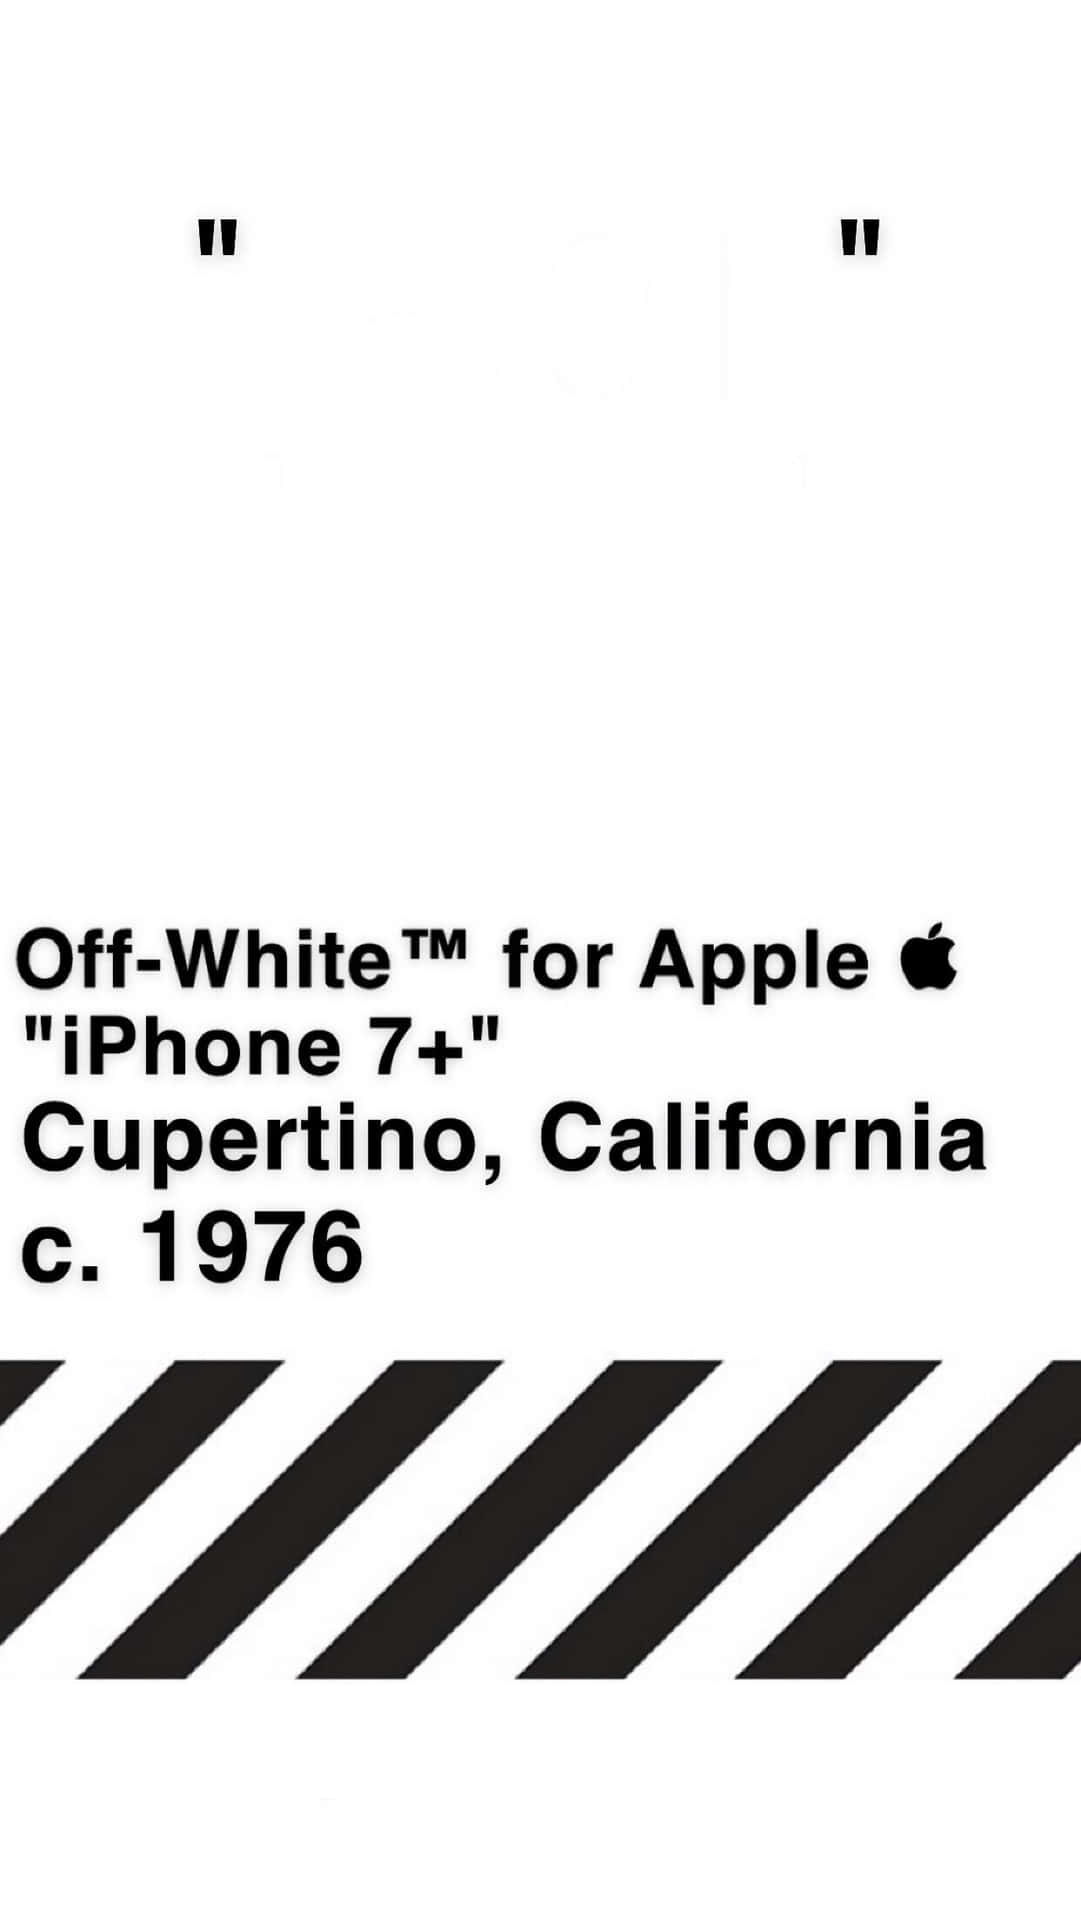 Apple iPad Device in Off White Color Wallpaper